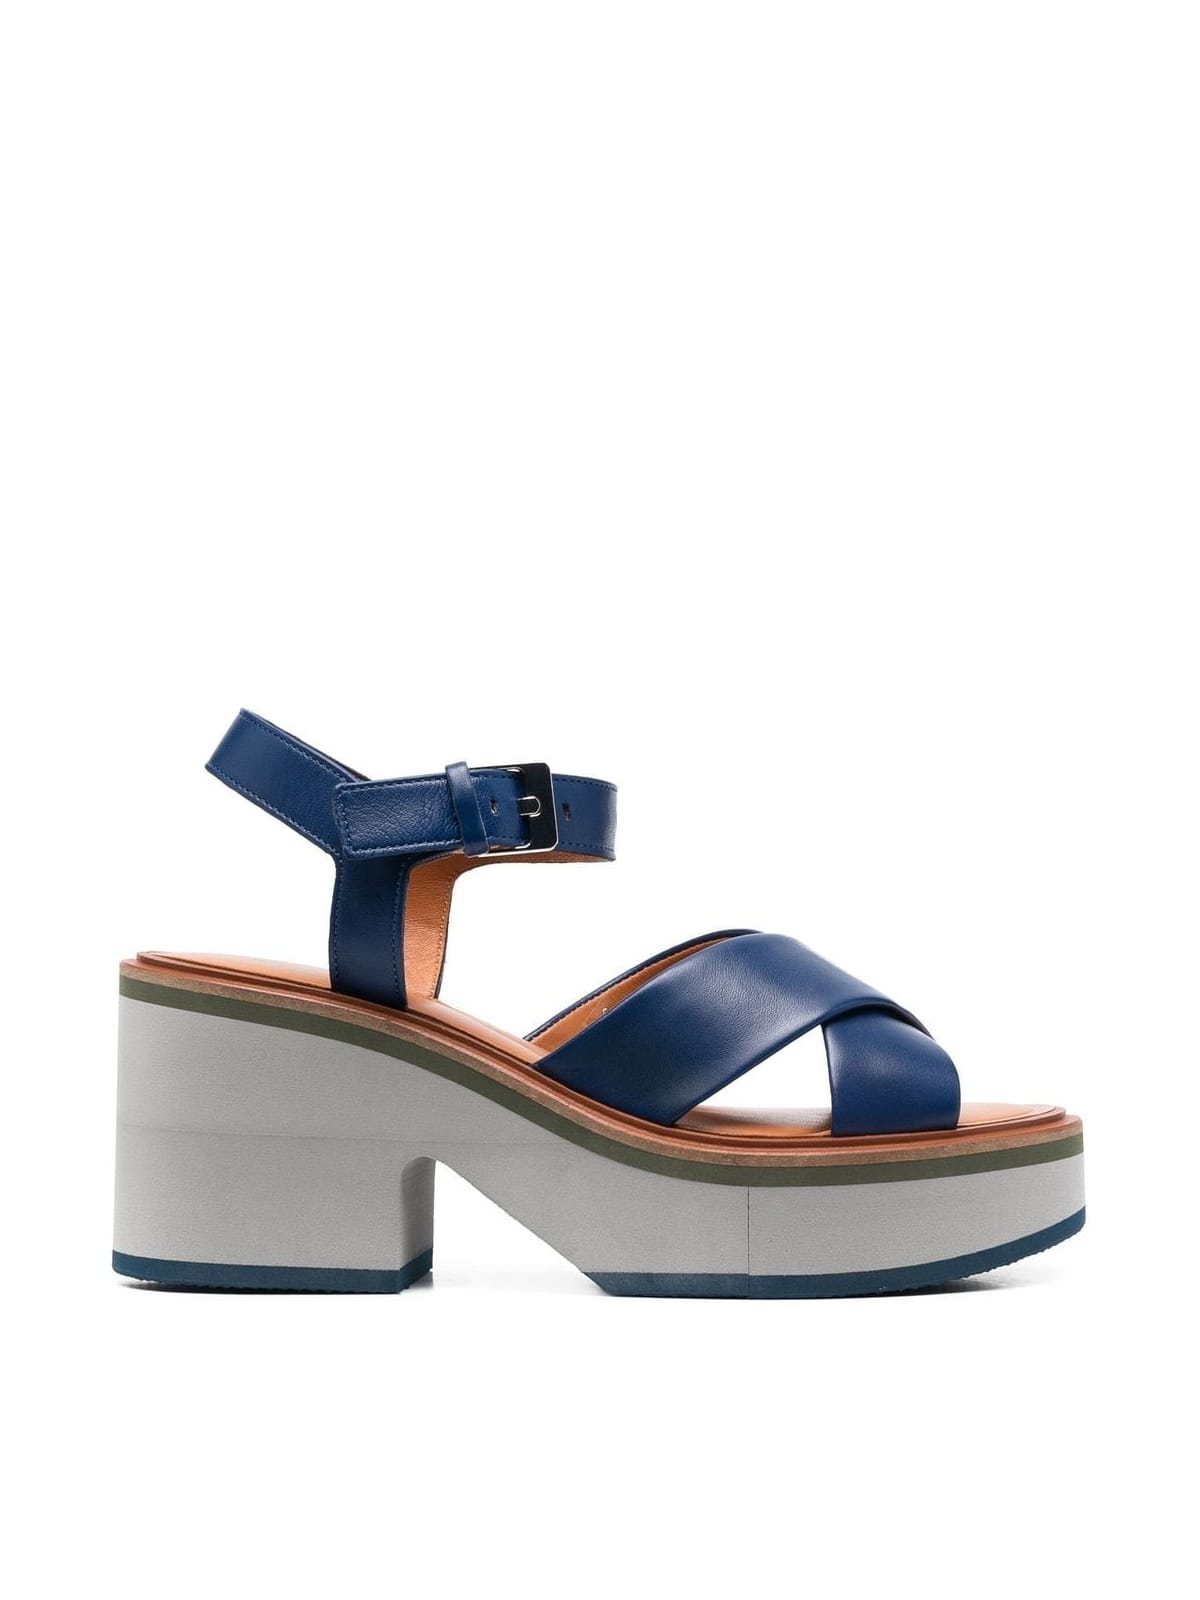 Shop Clergerie Charline9 Criss Cross Sandal With Closure At The Ankles In Navy Nap